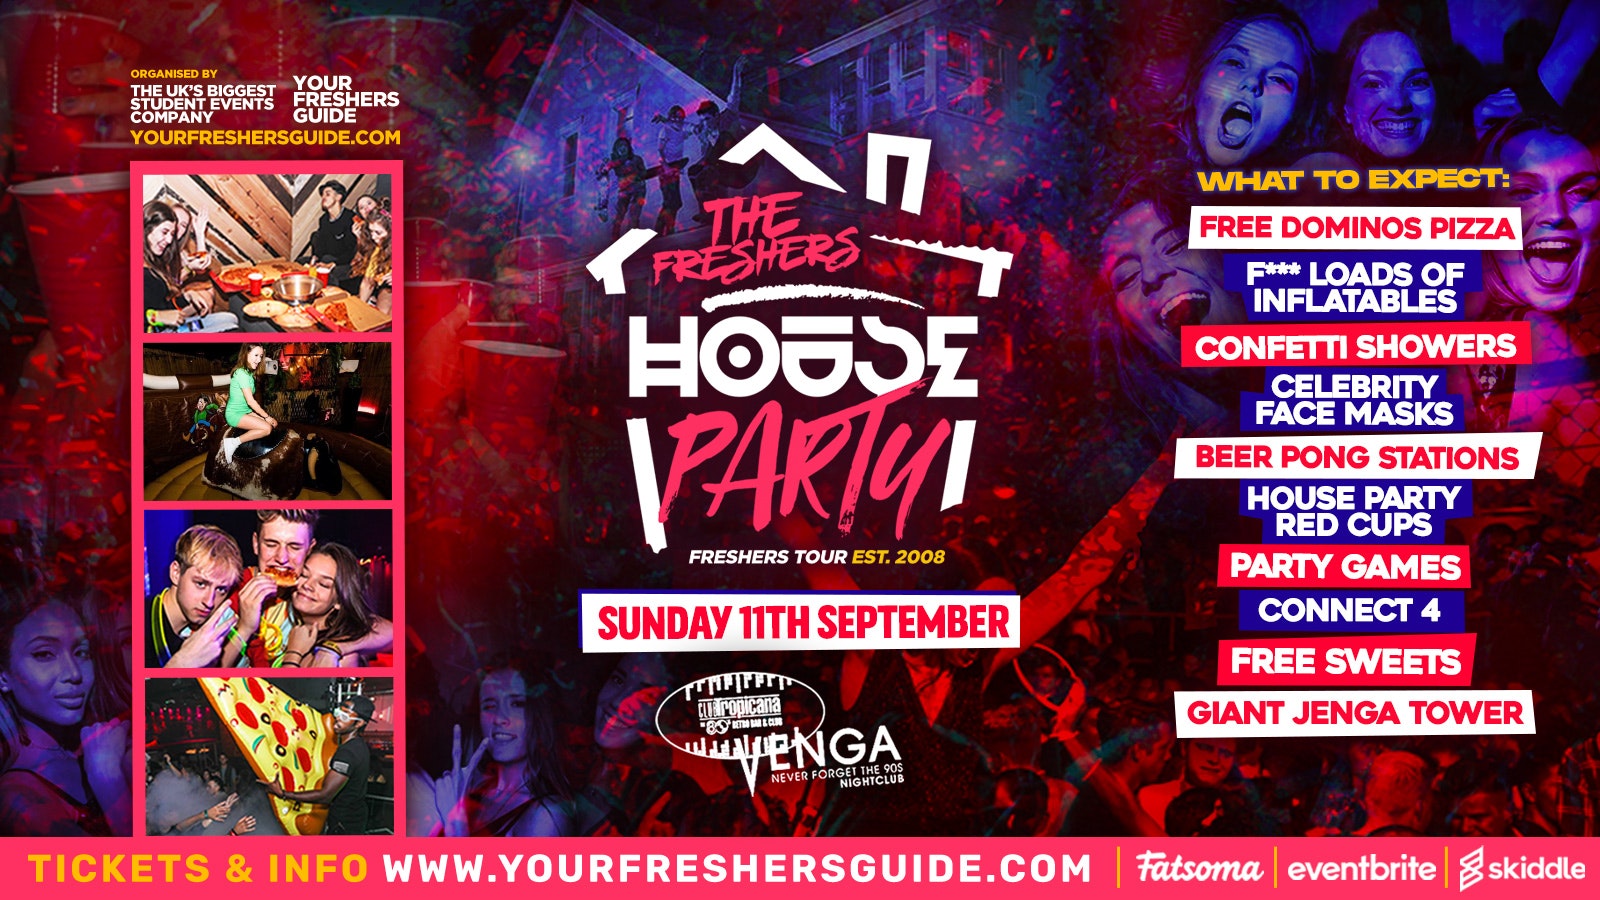 £1 Tickets – The Freshers House Party / Aberdeen Freshers 2022